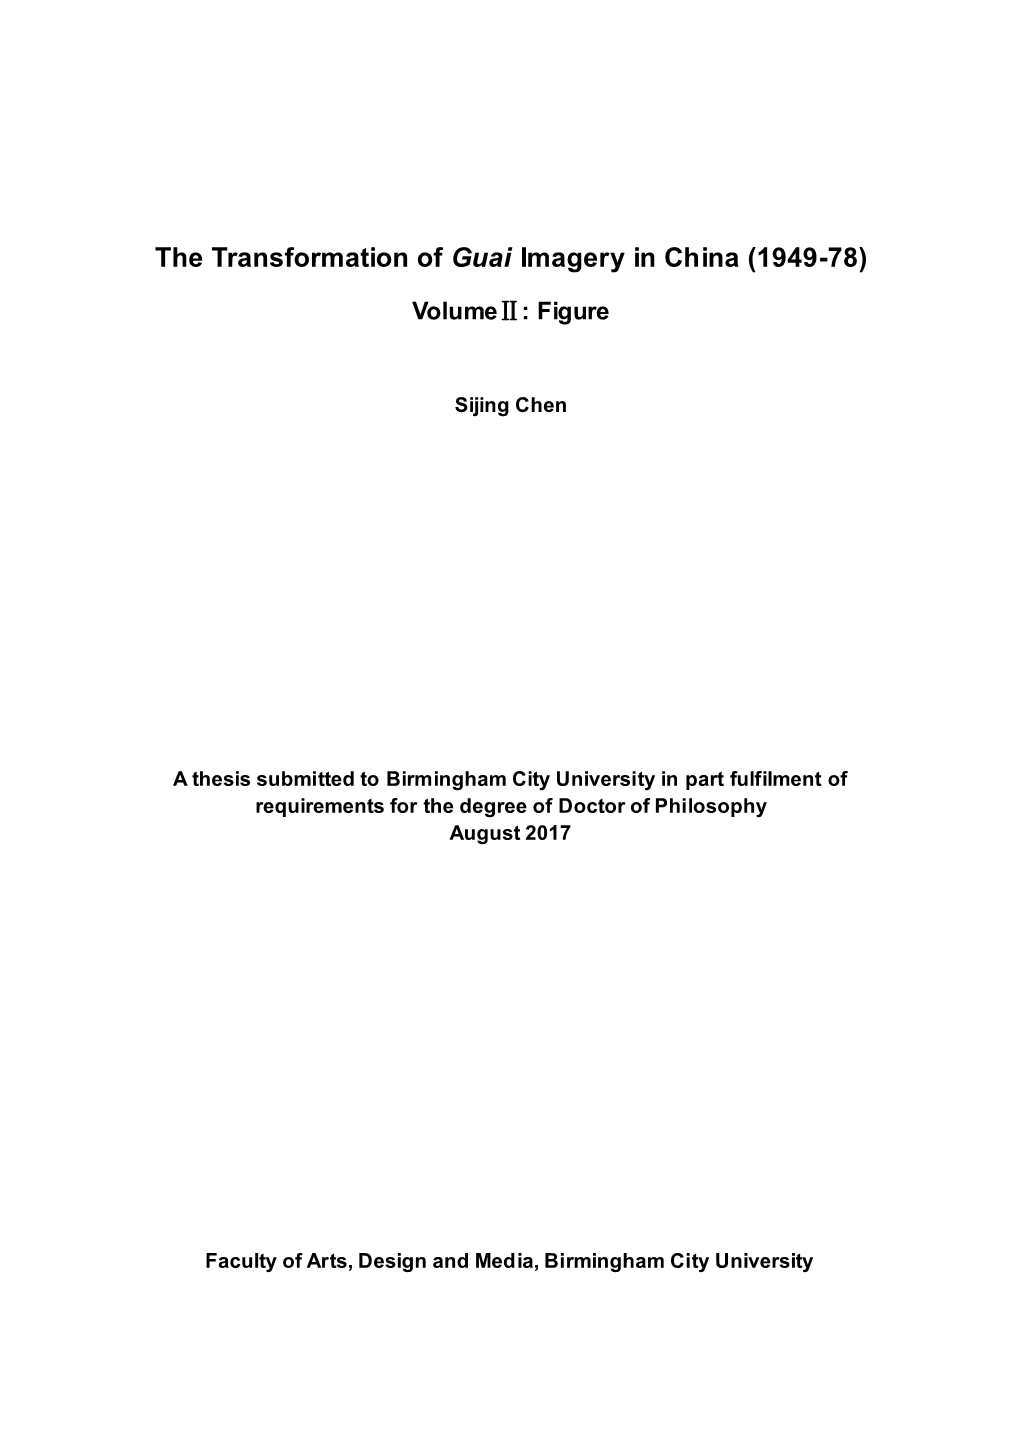 The Transformation of Guai Imagery in China (1949-78)